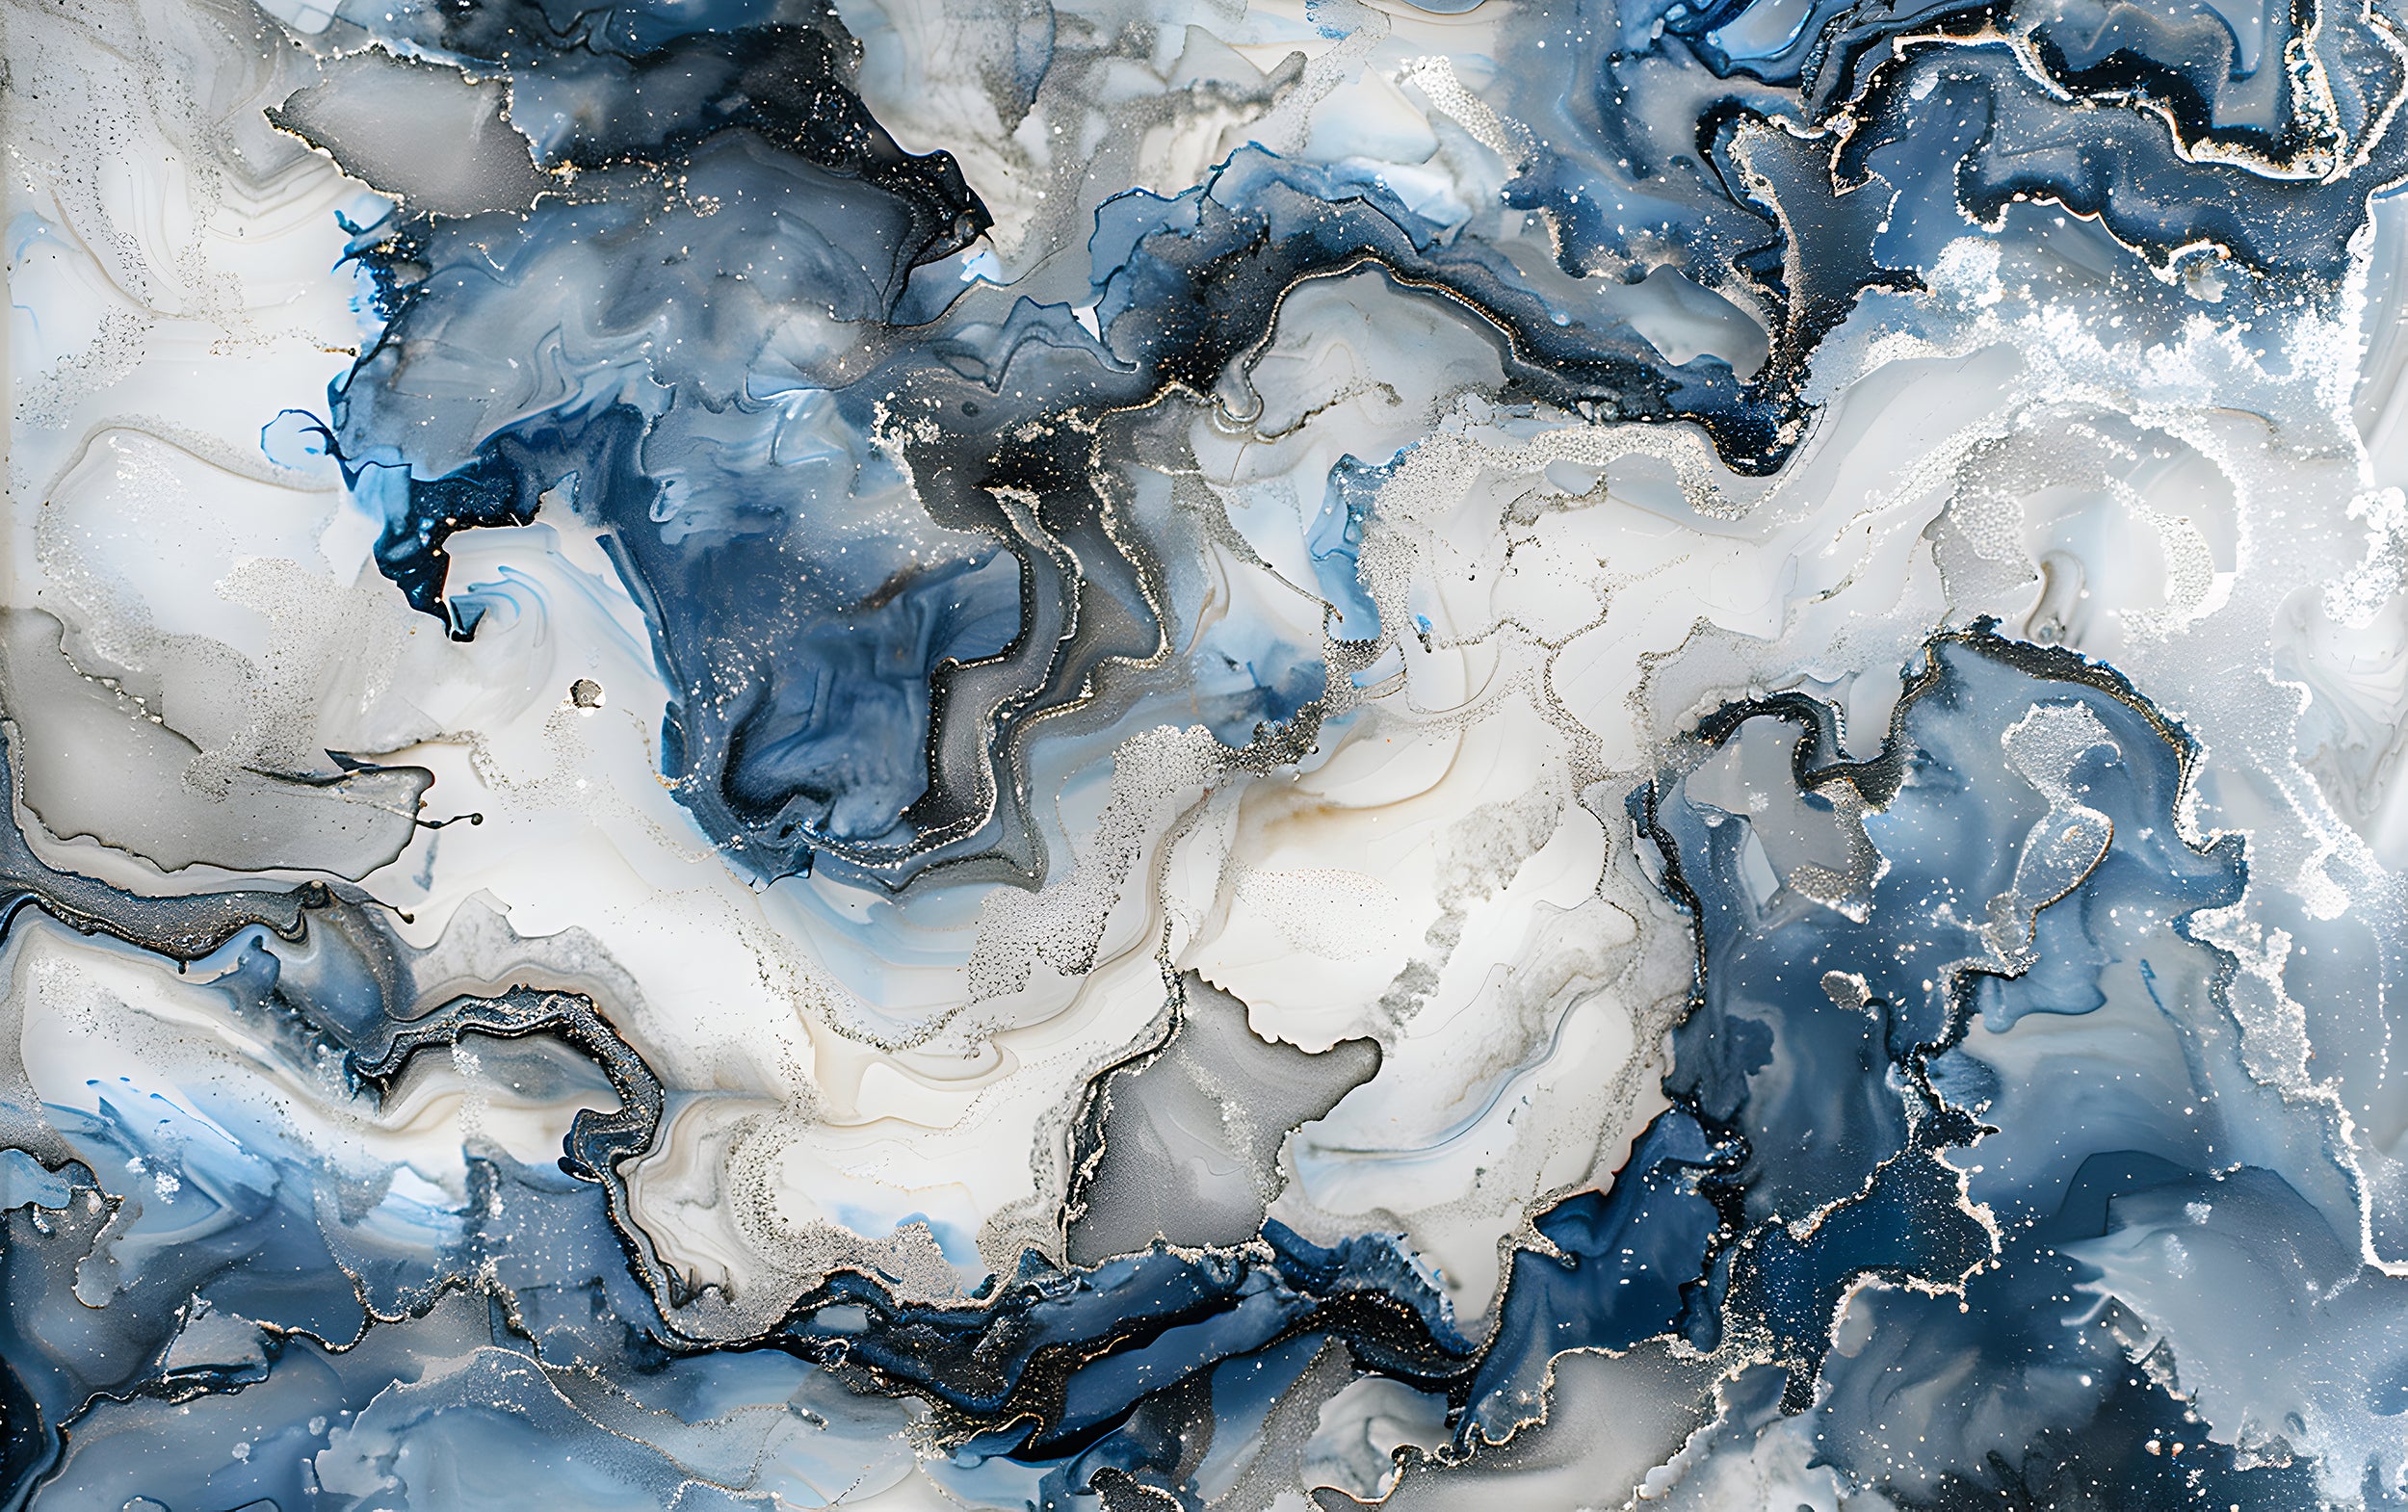 Blue and White Marble Wallpaper, Alcohol ink wall mural, Abstract Peel and Stick Stone Wallpaper, Blue & Silver Removable Modern Art